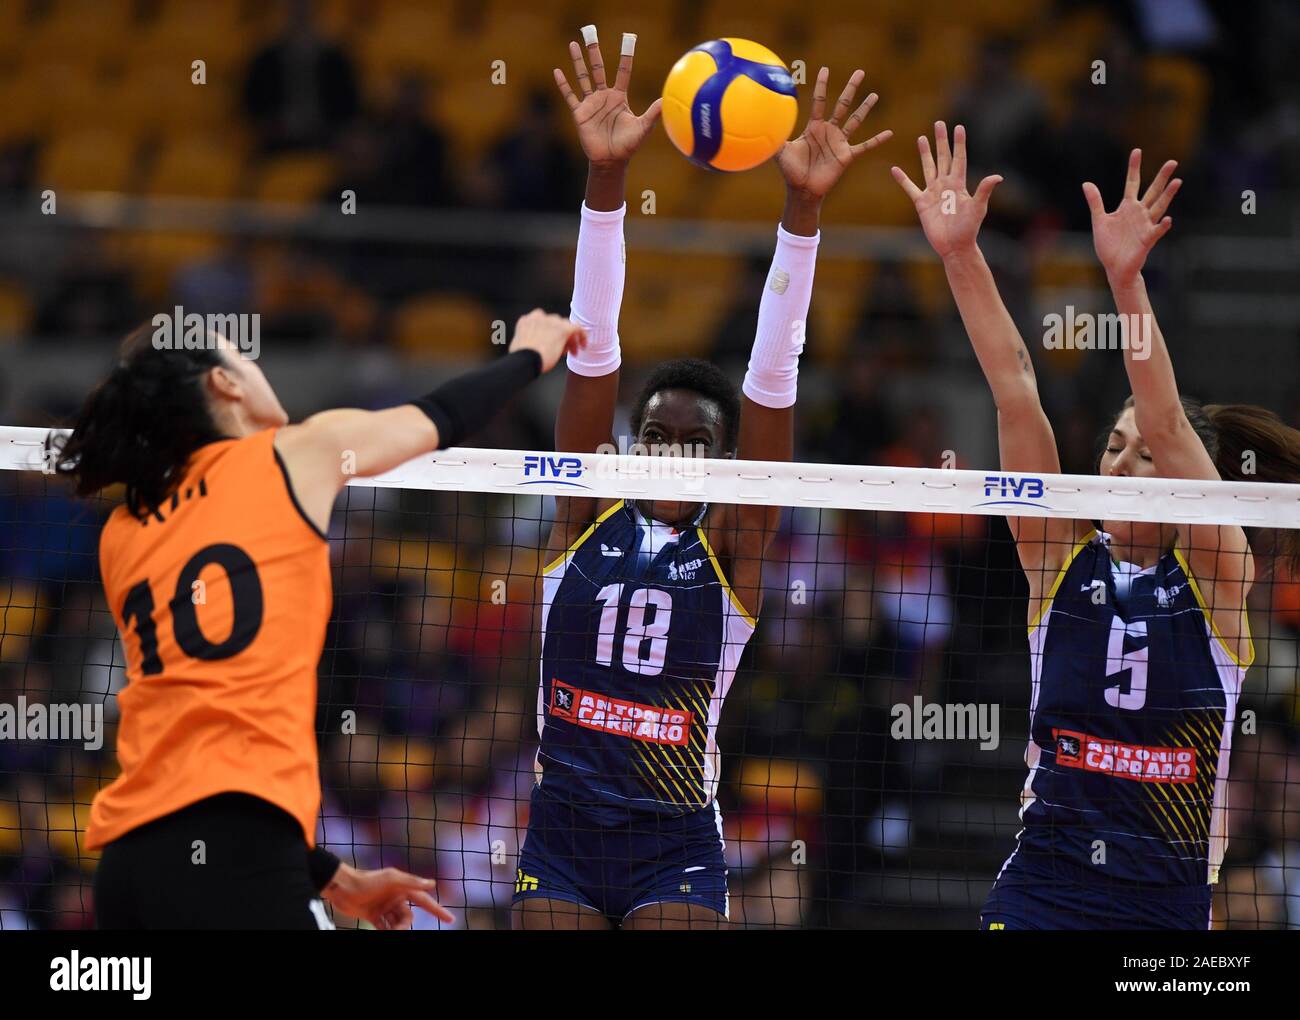 Shaoxing, China. 8th Dec, 2019. Paola Ogechi Egonu (C) and Robin De Kruijf (R) of Imoco Volley Conegliano block during the final match between Imoco Volley Conegliano of Italy and Eczaclbasl Vitra Istanbul of Turkey at 2019 FIVB Women's Club World Championship in Shaoxing, east China, on Dec. 8, 2019. Credit: Li Jundong/Xinhua/Alamy Live News Stock Photo